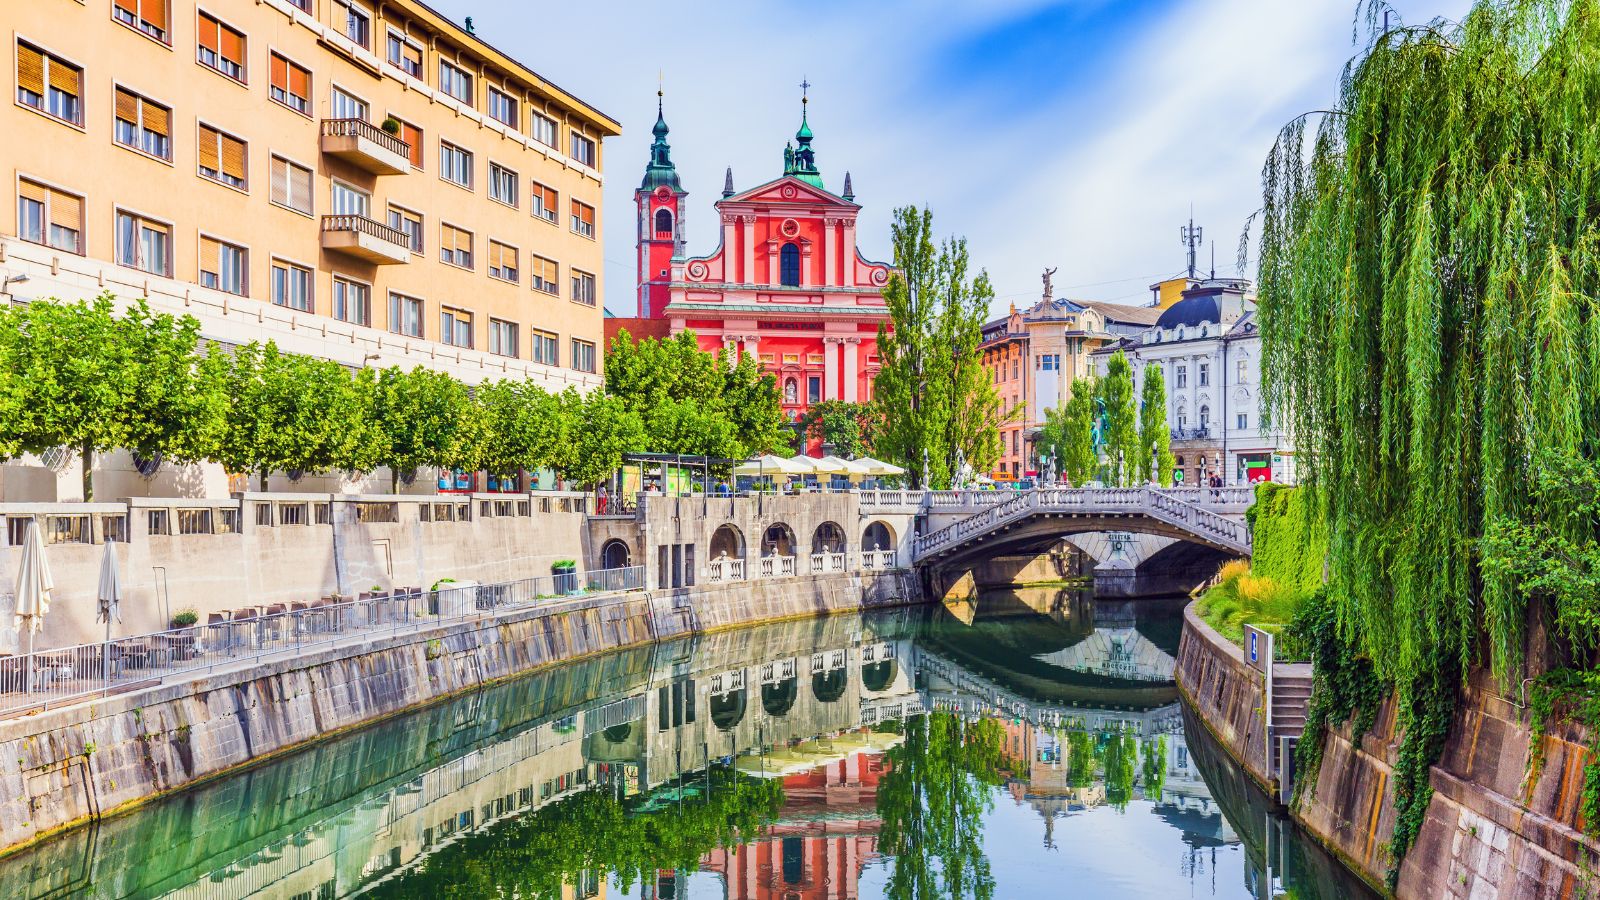 <p>According to another traveler, Slovenia is a hidden gem rarely crowded in June. Drawing comparisons to Vienna, this user describes Slovenia as a smaller and private version of the famous Austrian city. With its stunning landscapes, picturesque towns, and welcoming locals, Slovenia offers a peaceful and less touristy escape for those seeking a unique European experience.</p>